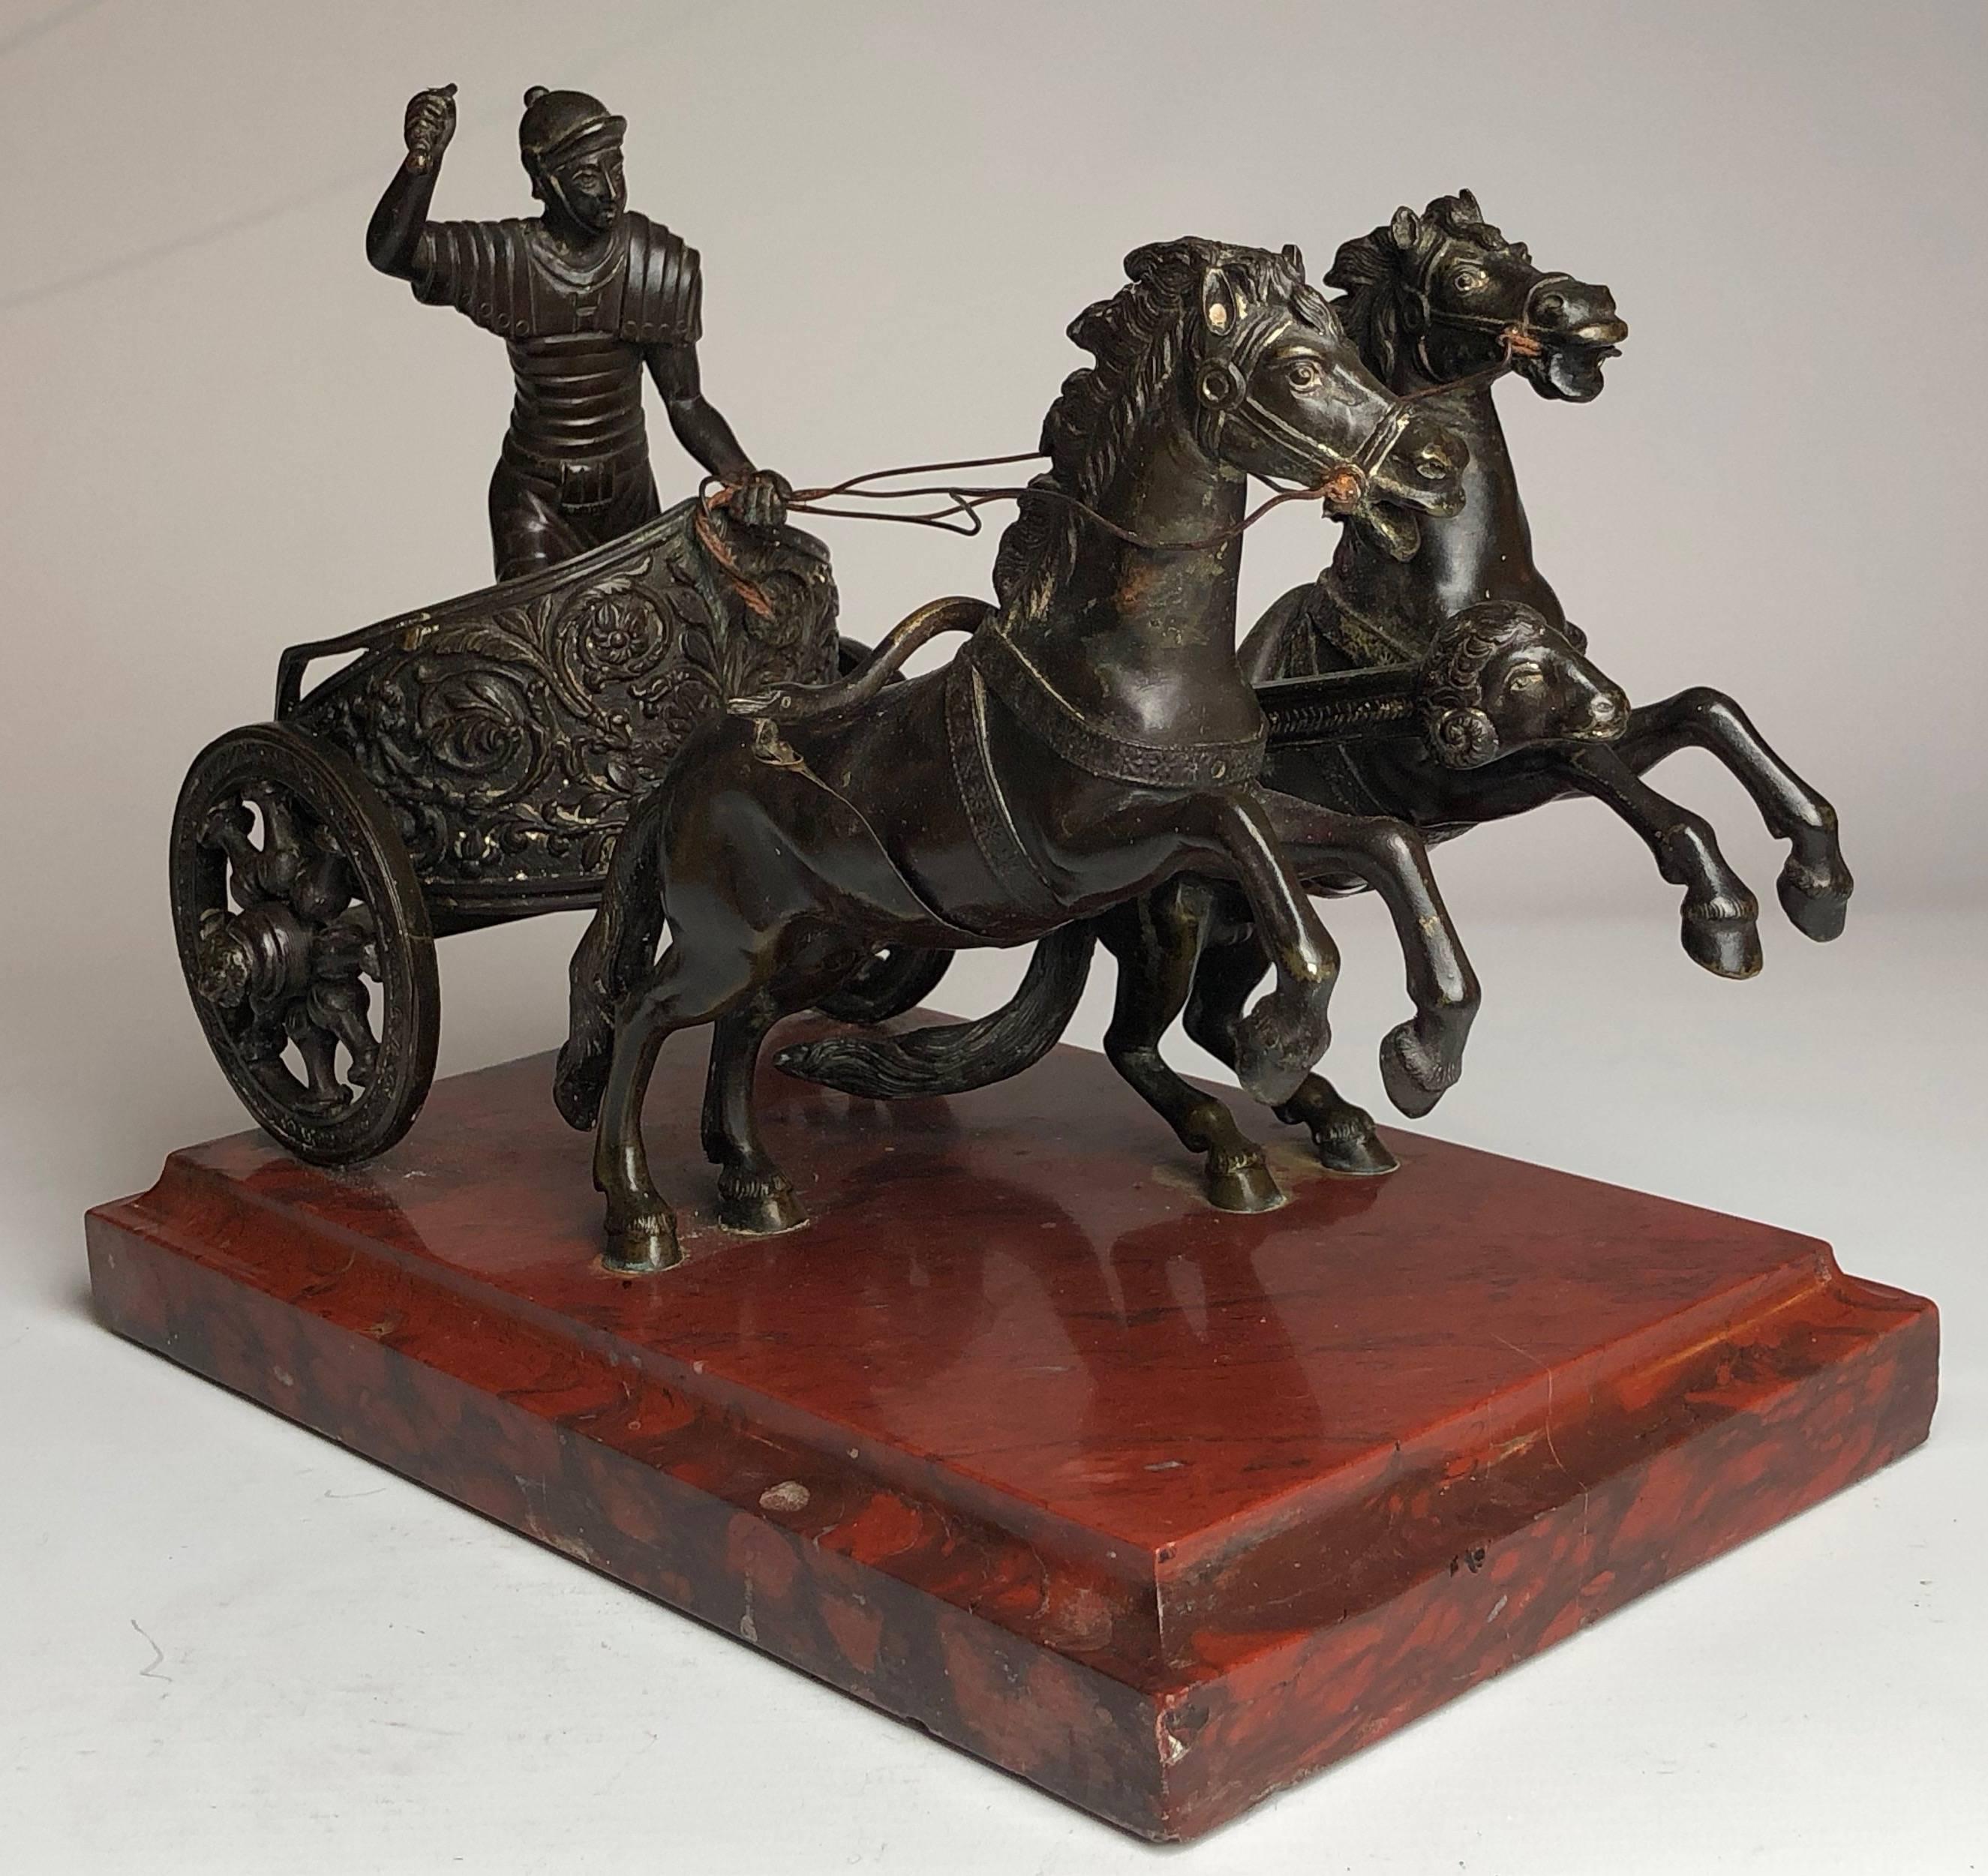 Superb quality bronze depicting a Roman Chariot pulled by two horses
On a reuge marble and bronze base.

The piece measures 10